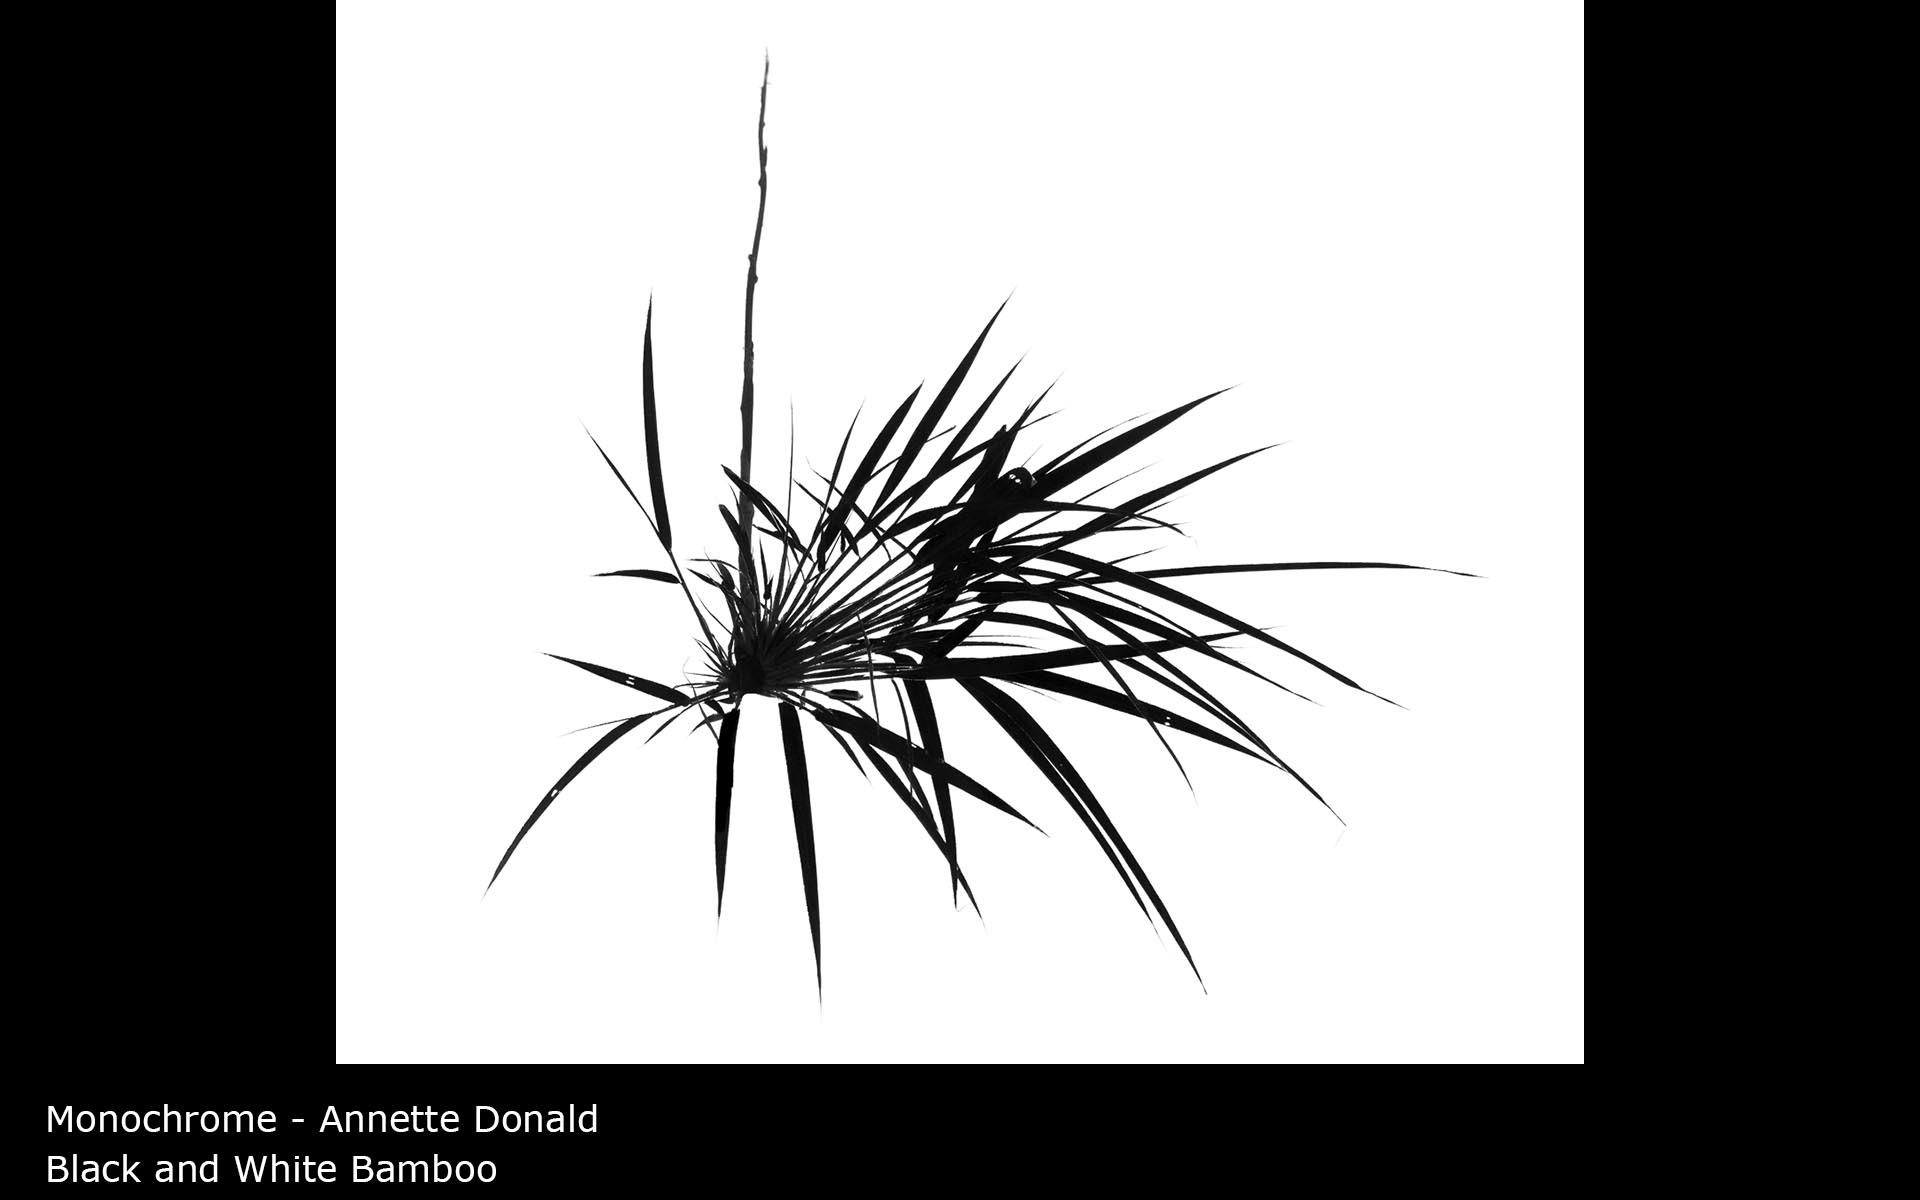 Black and White Bamboo - Annette Donald